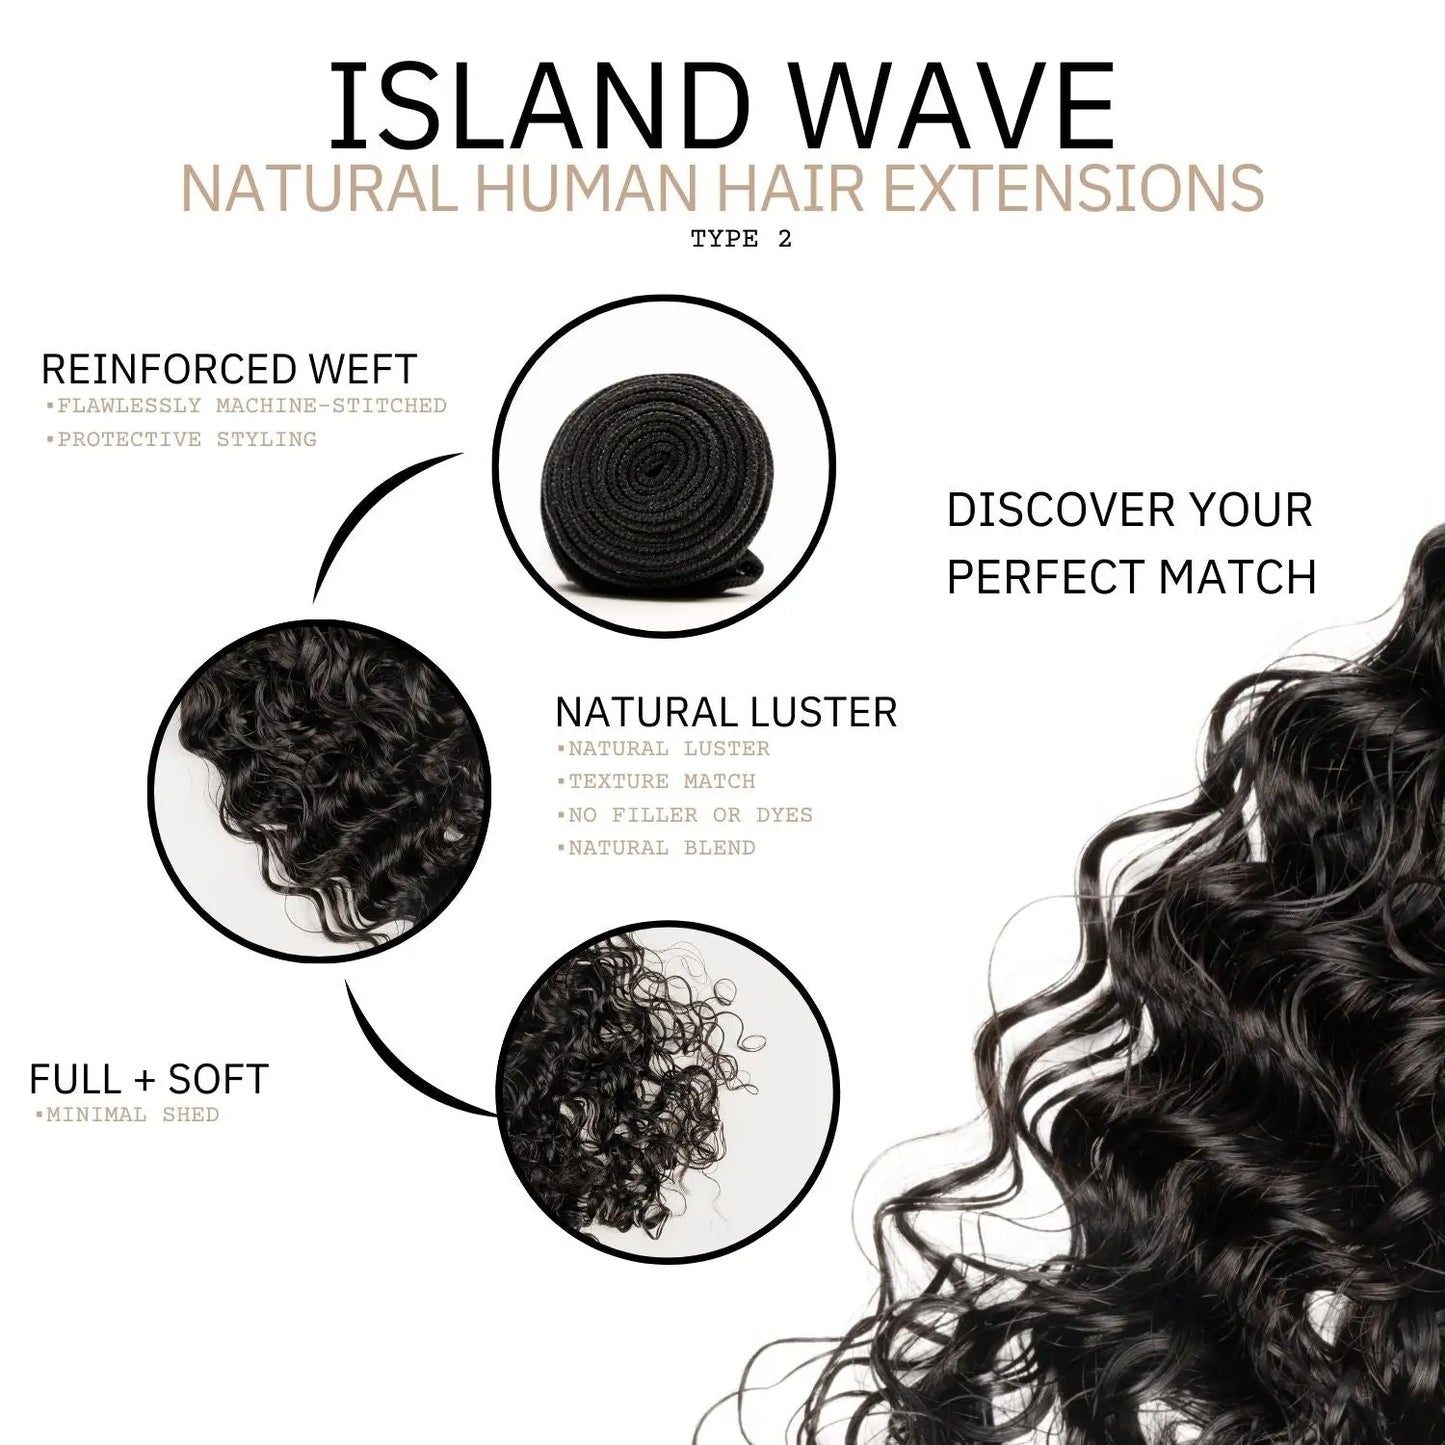 ISLAND WAVE - NATURAL HAIR EXTENSIONS True and Pure Texture